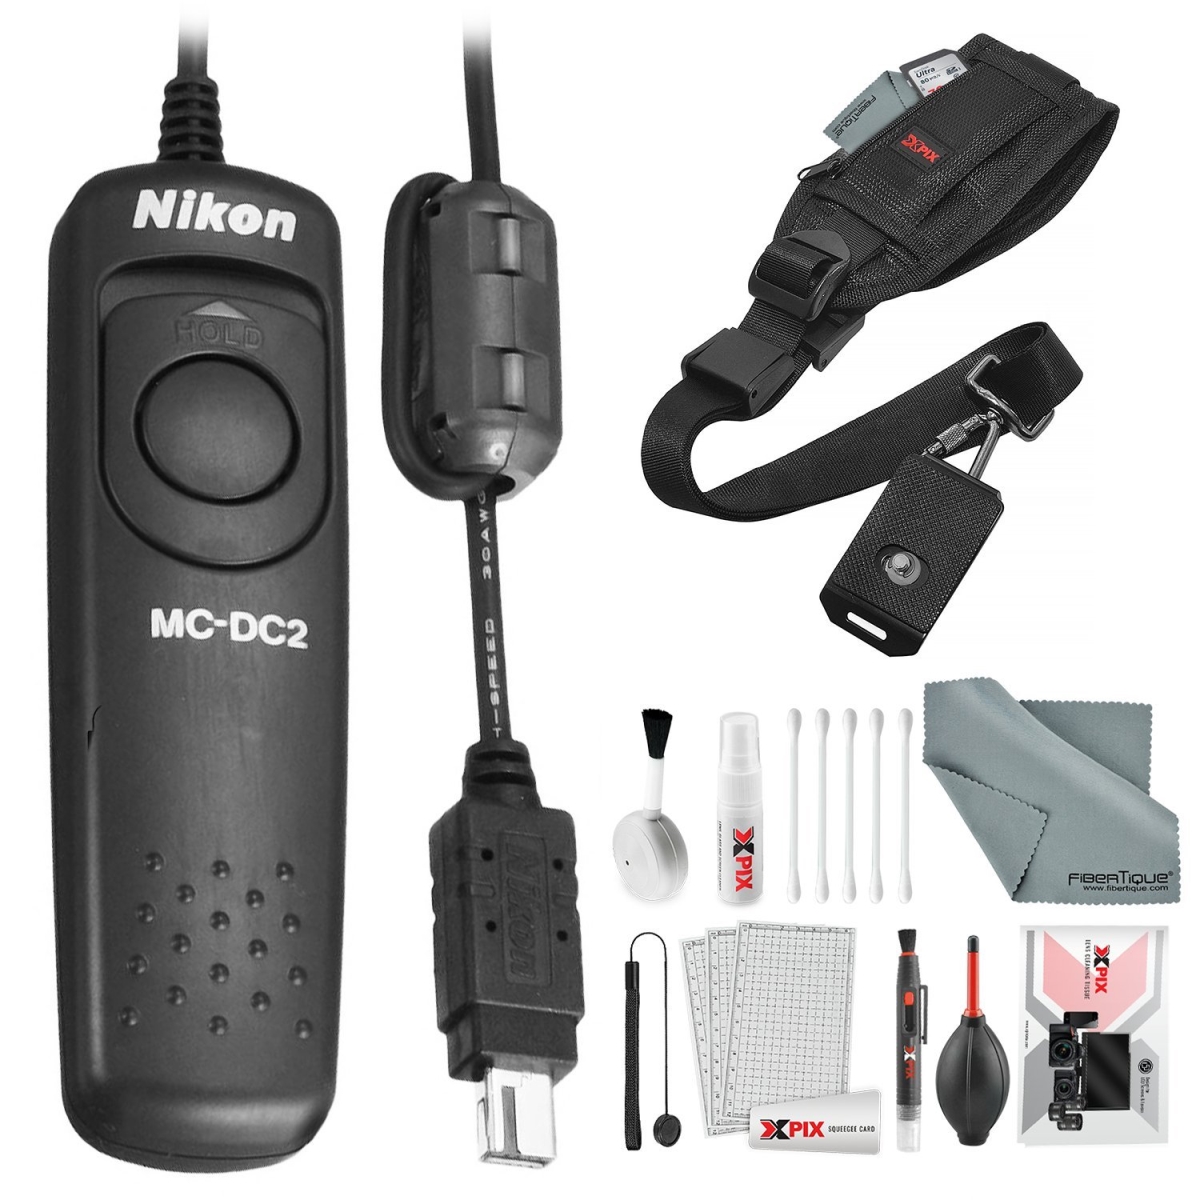 Picture of Nikon NIKON-25395-D-KIT1805-NFBA MC-DC2 Remote Release Cord with Xpix Camera Strap & Deluxe Camera Lens Cleaning Kit